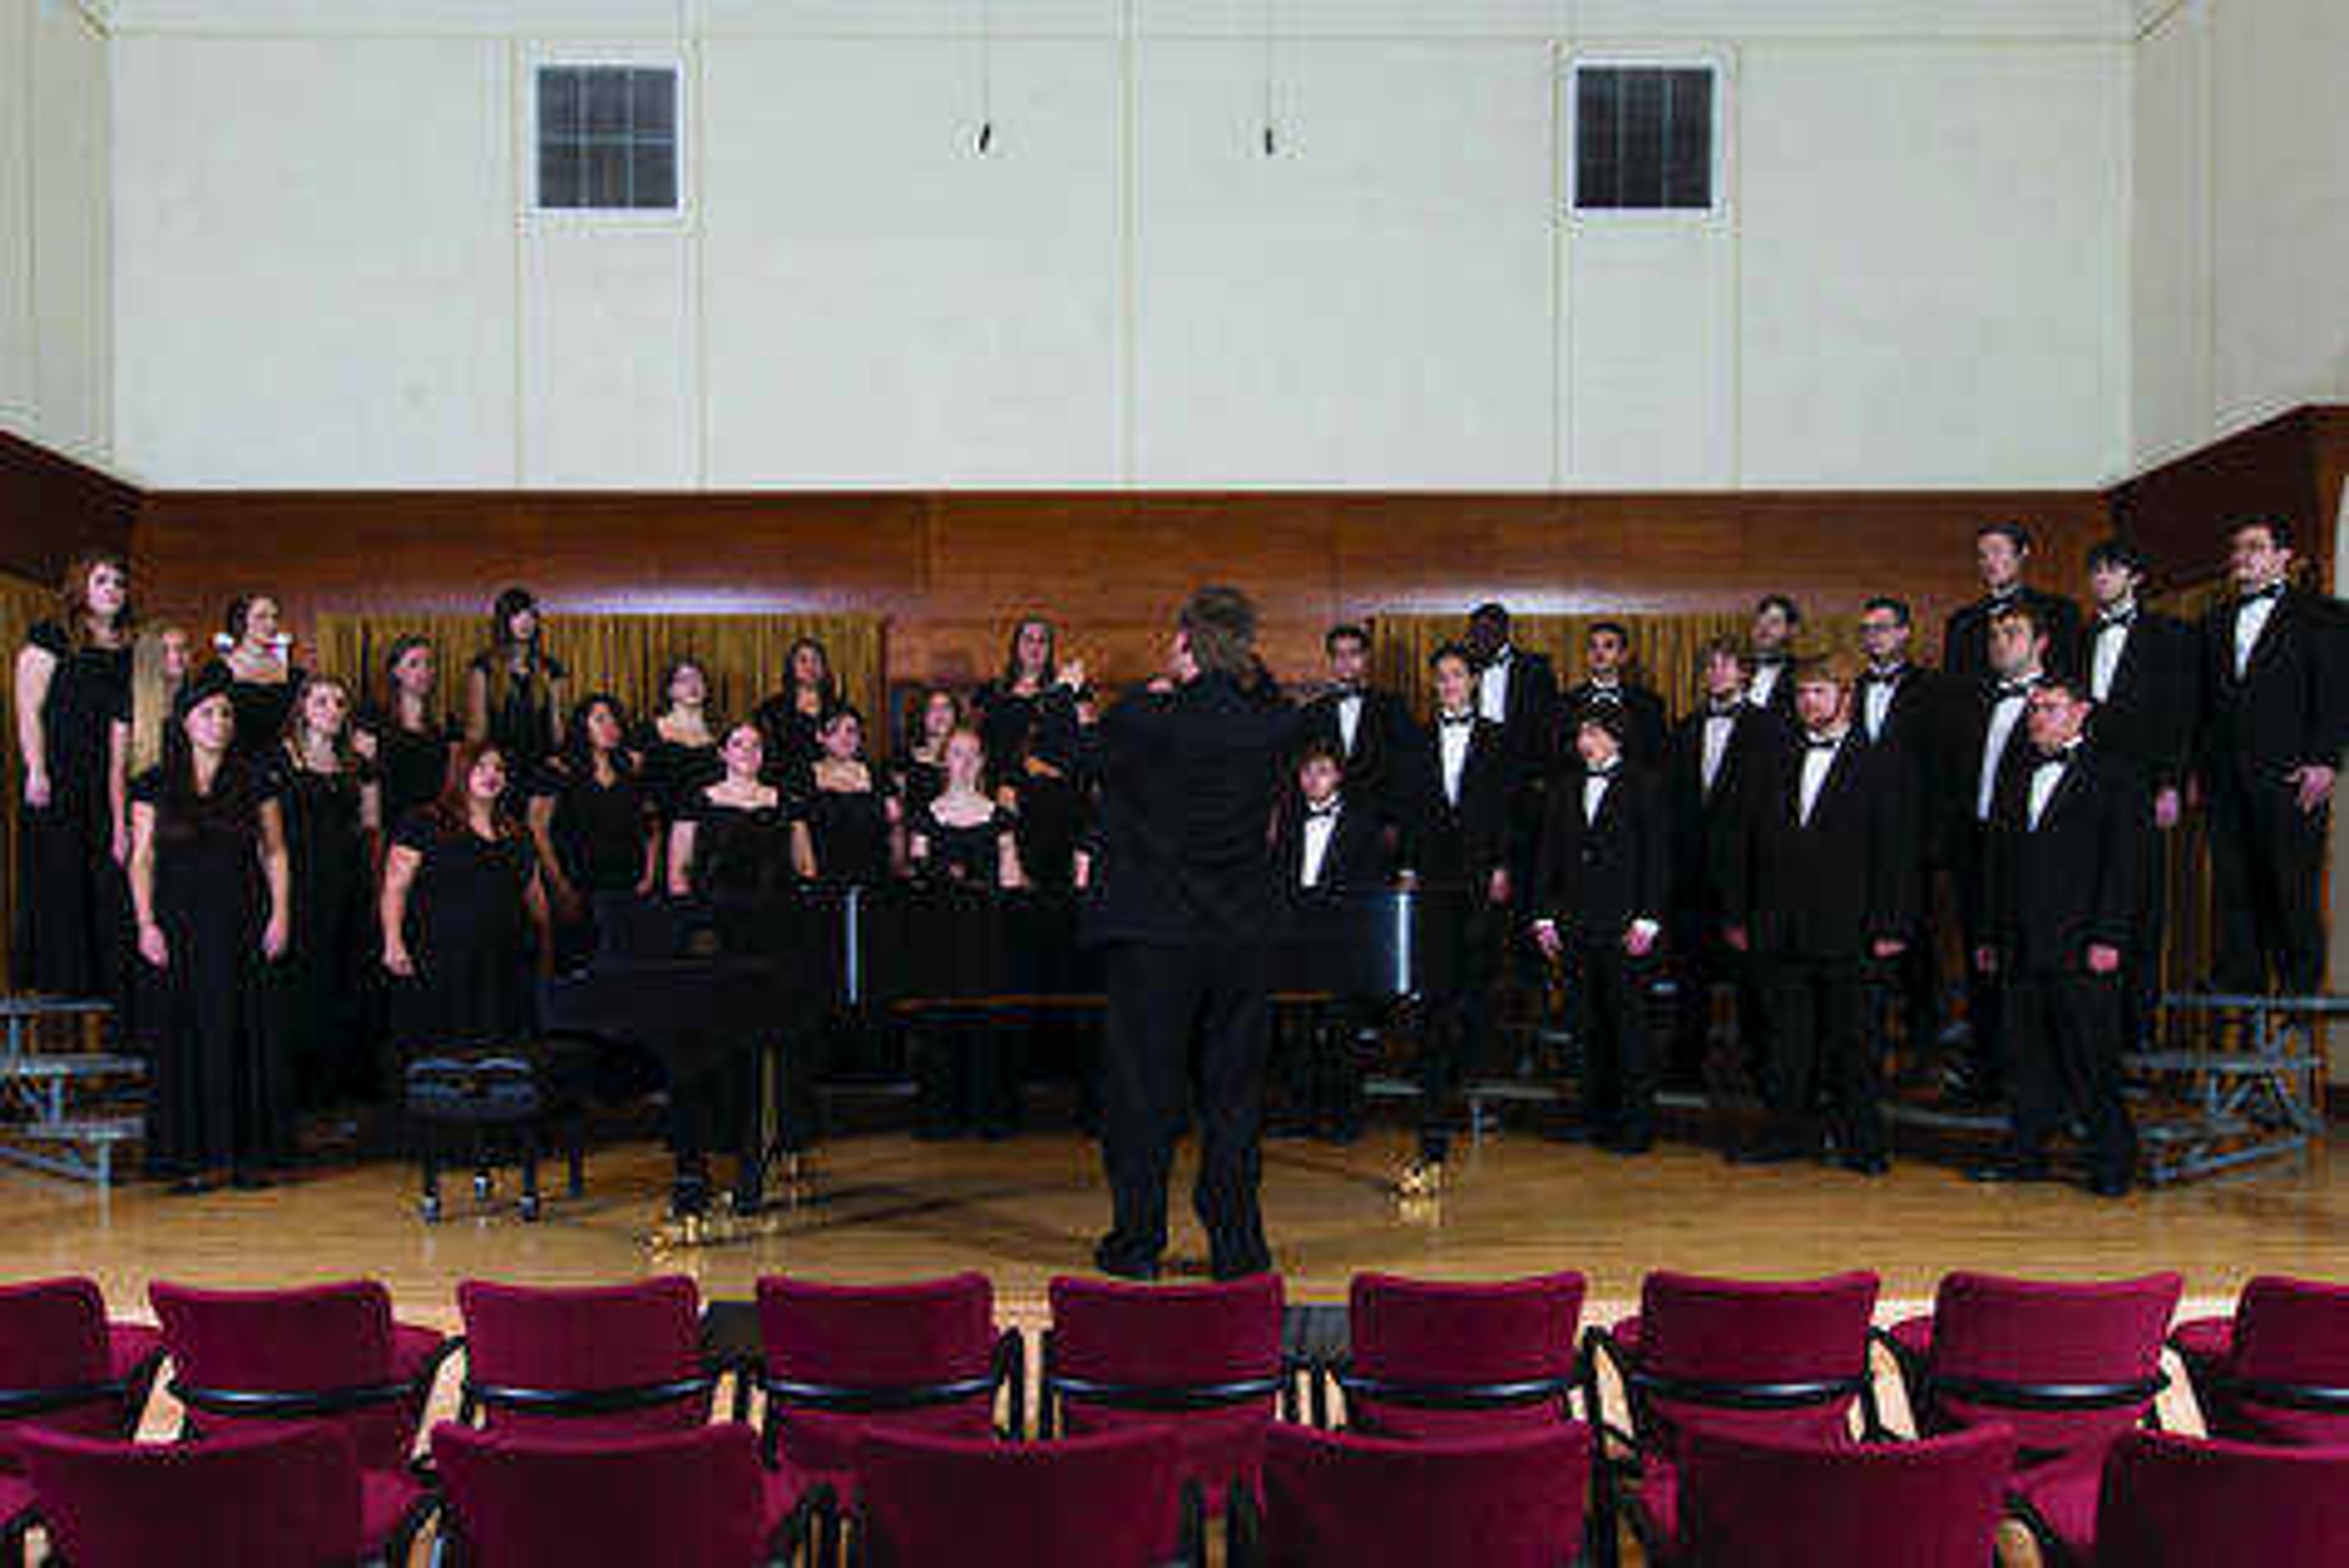 Southeast's symphony and choirs pair with SIU for Beethoven's Ninth